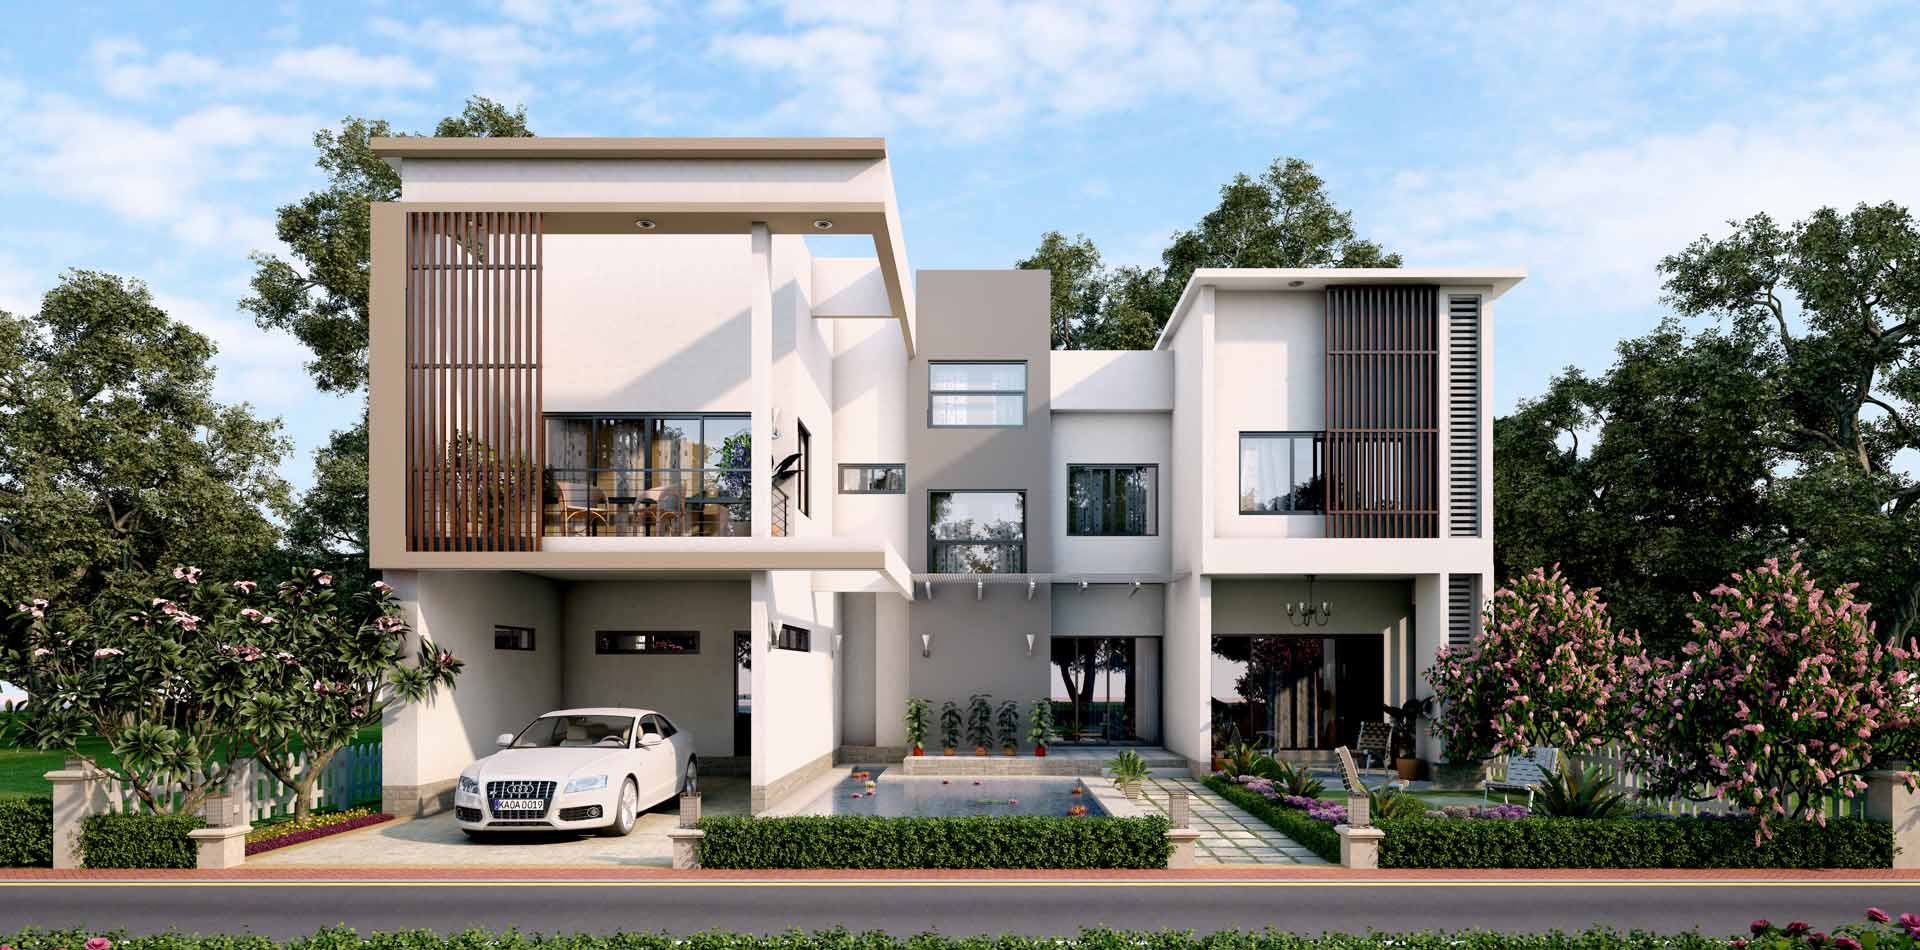 Century Wintersun offers a peaceful and well-developed set of Luxury villas for sale in Yelahanka Update